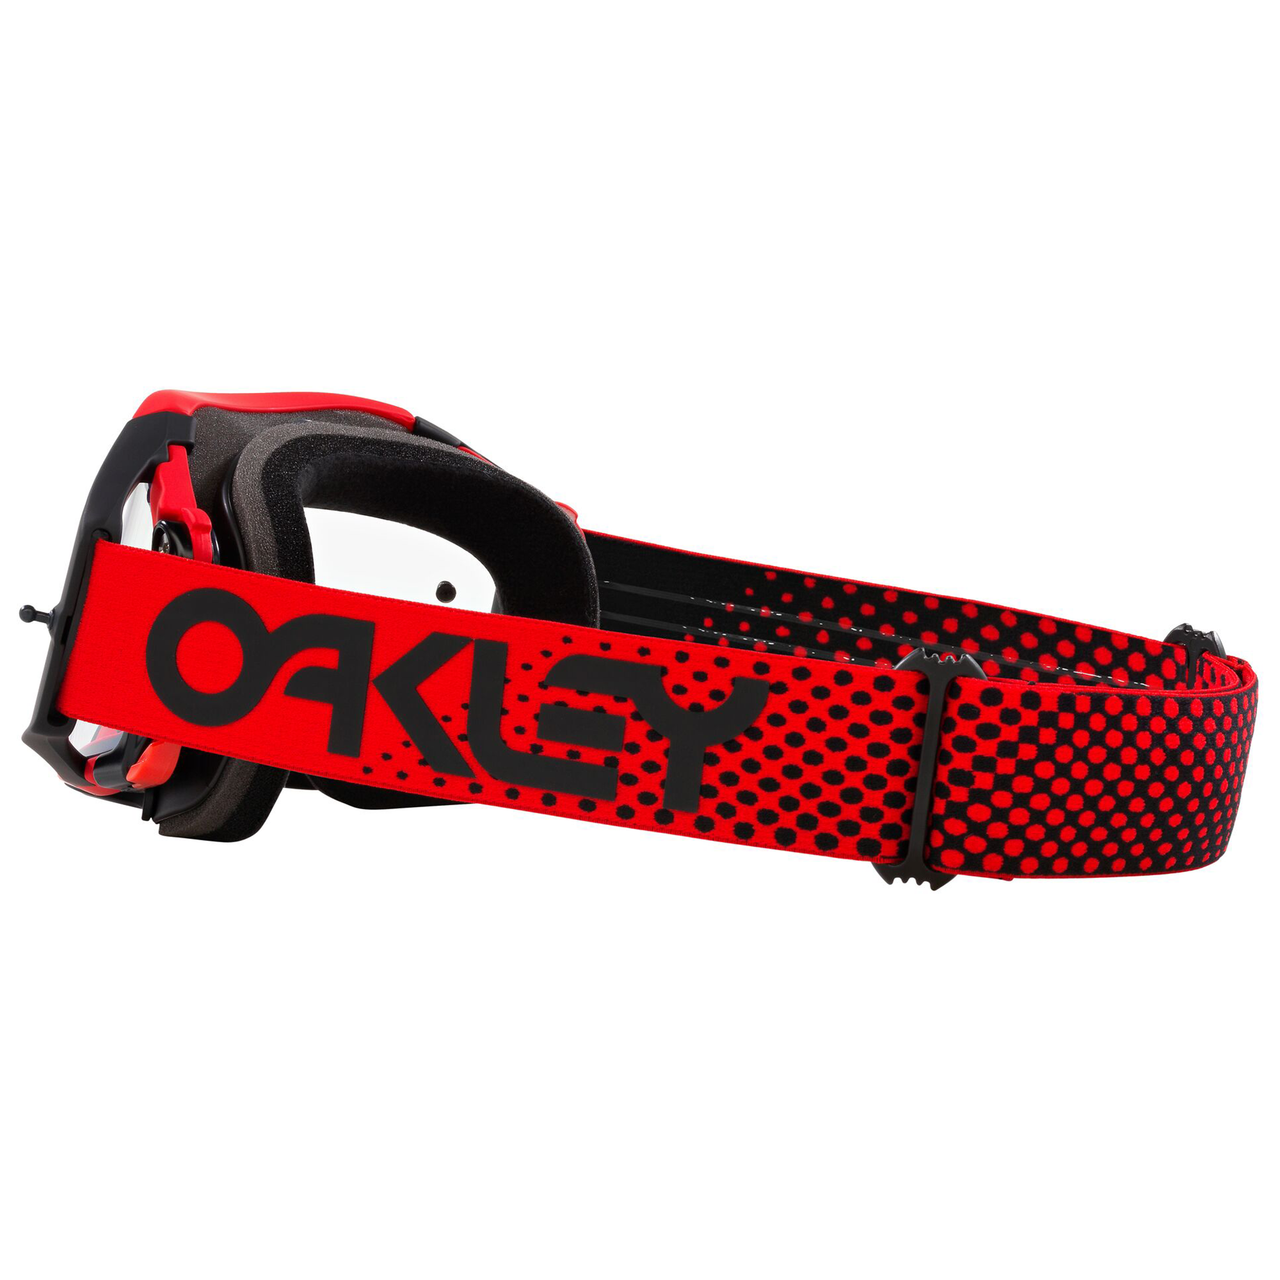 Oakley Airbrake MX Goggle Moto Red 2 - Clear Lens